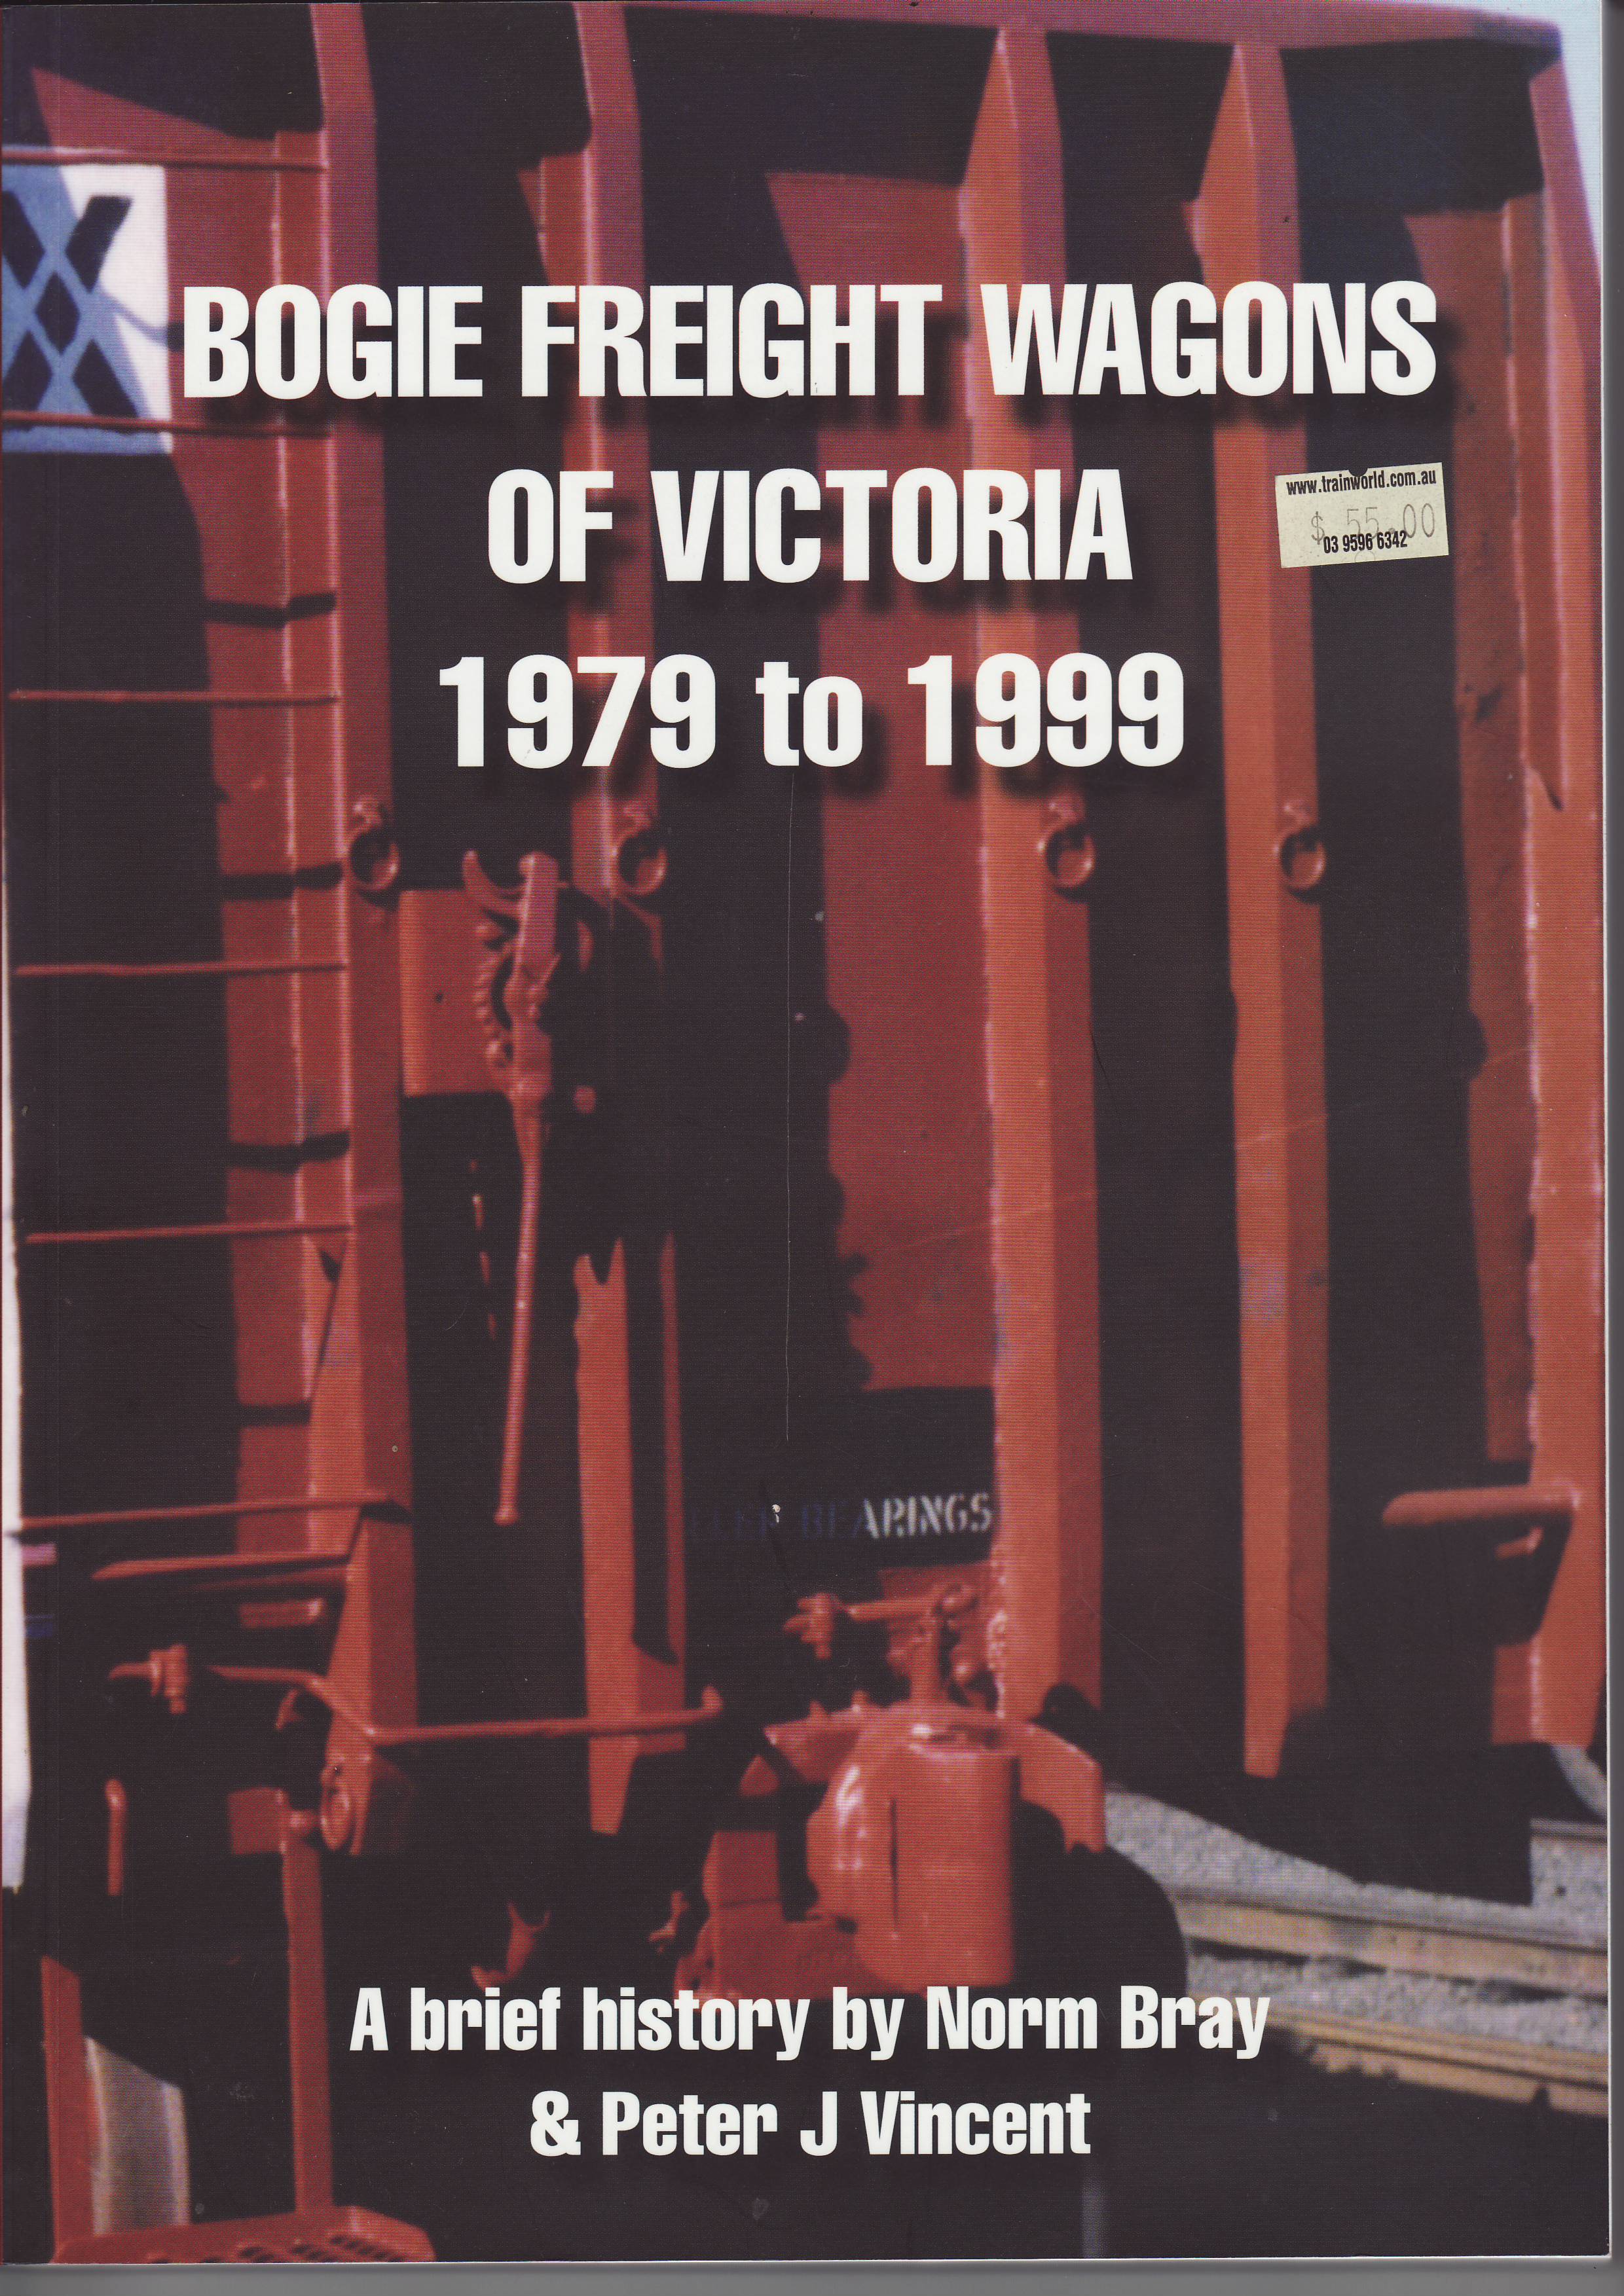 Bogie Freight Wagons of Victoria 1979 to 1999 - A Brief History - Bray, Norm & Vincent, Peter J.